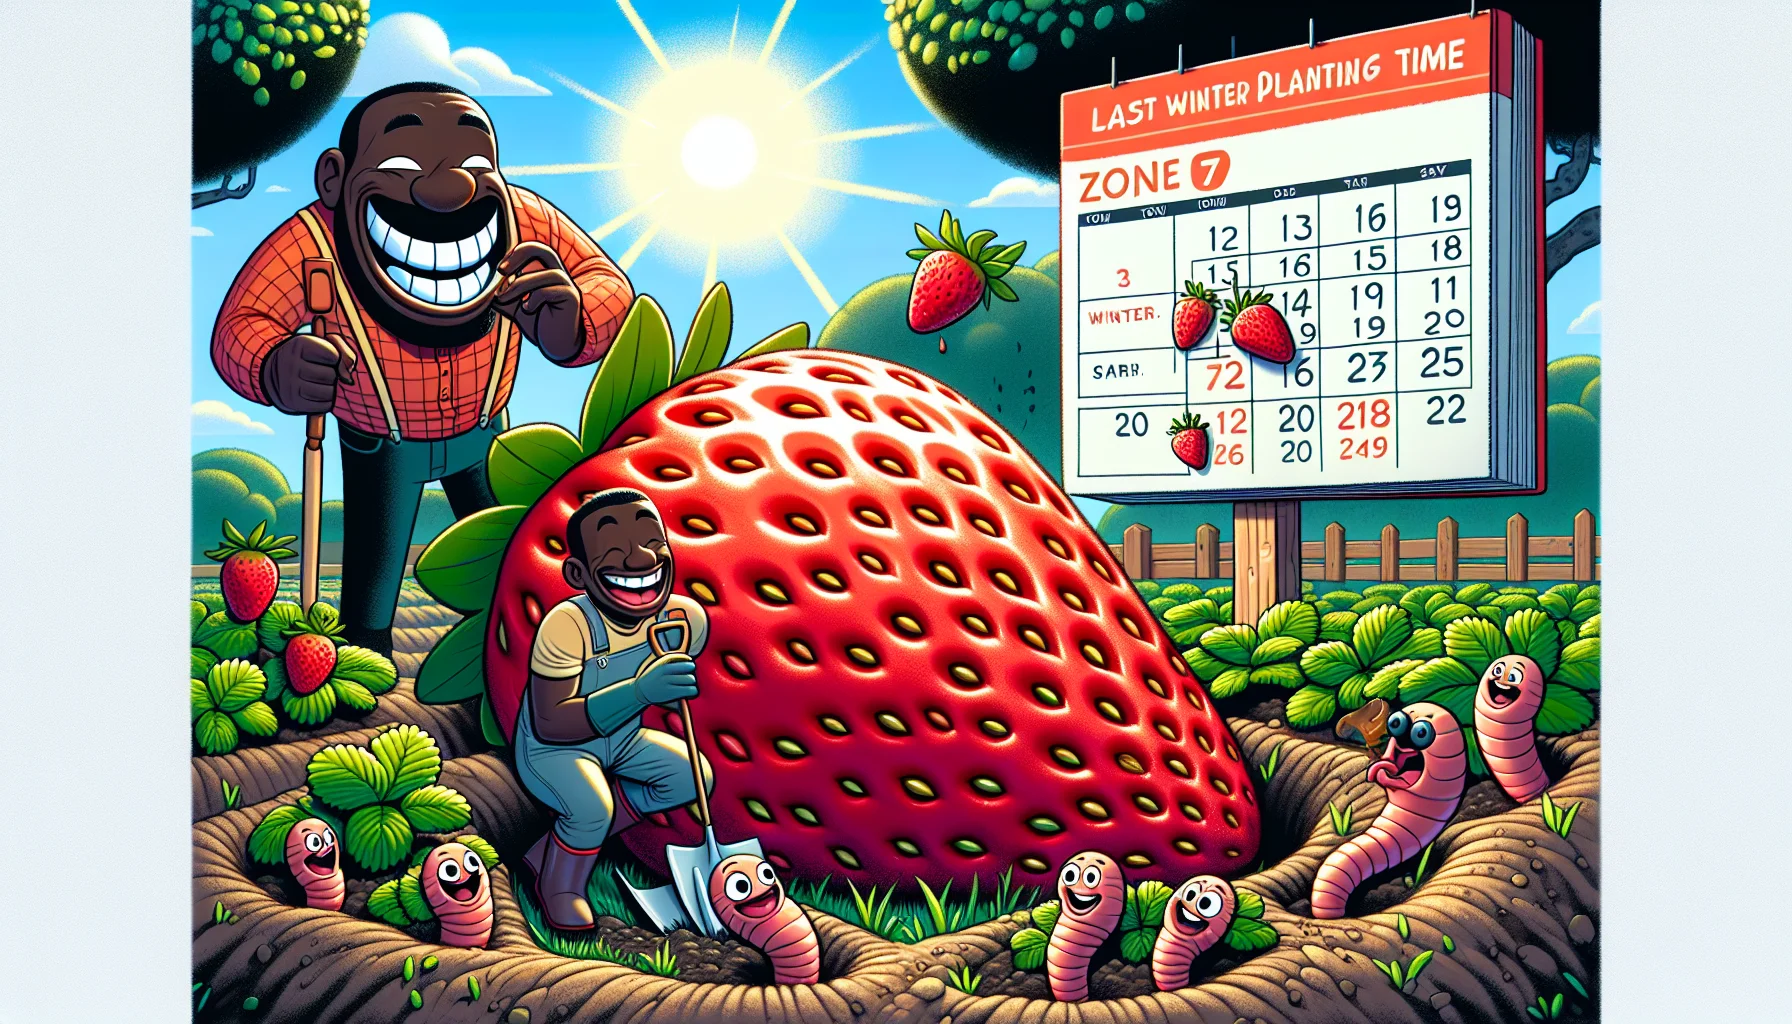 Illustrate a comedic scenario set in a lush garden, depicting the preferable season of planting strawberries in zone 7. Show a human character of Black descent, with a hearty laugh, as they mischievously bury a calendar displaying late winter to early spring dates, symbolizing the best planting time. To encourage gardening, show the same character marveling at a ripe, oversized strawberry, gleaming in sunlight, while a group of friendly earthworms with cartoonish eyes curiously observe the whole scenario, offering tiny gardening tools.